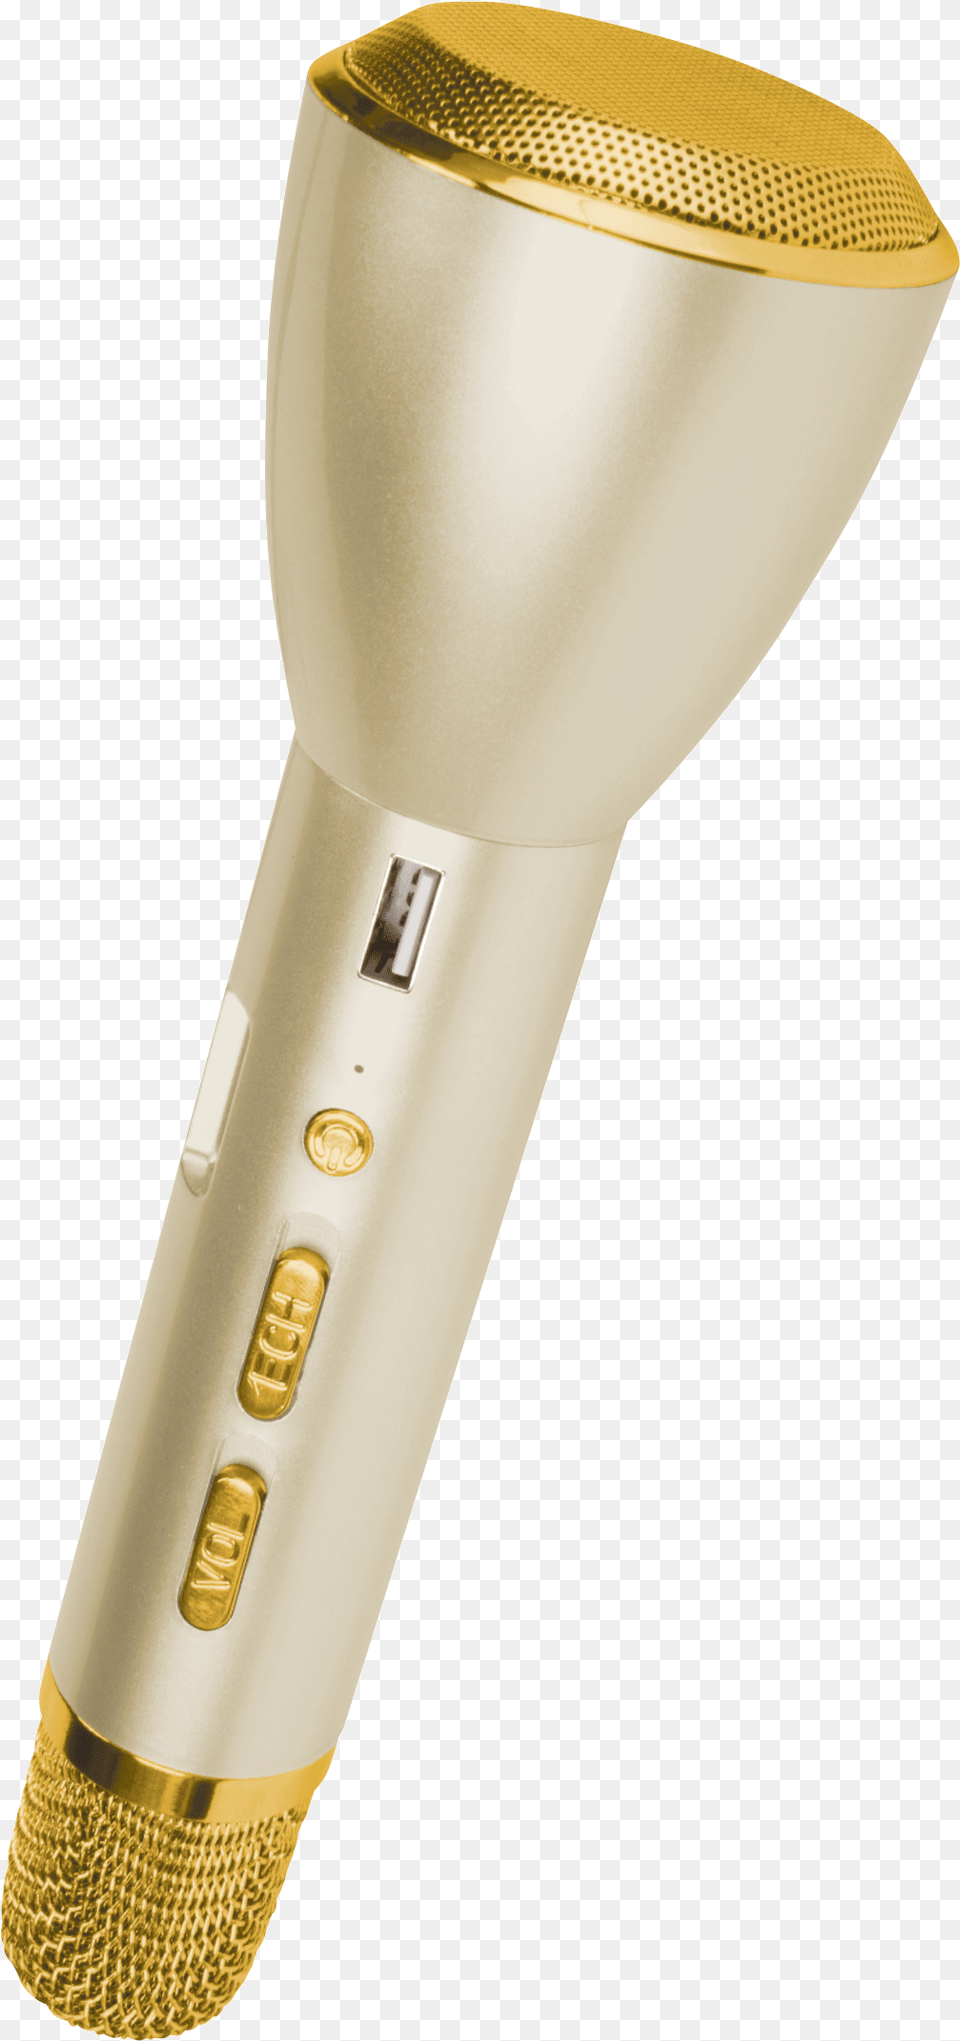 Sing Along Bluetooth Wireless Karaoke Microphone And Speaker Gold Portable, Electrical Device, Lamp, Appliance, Blow Dryer Png